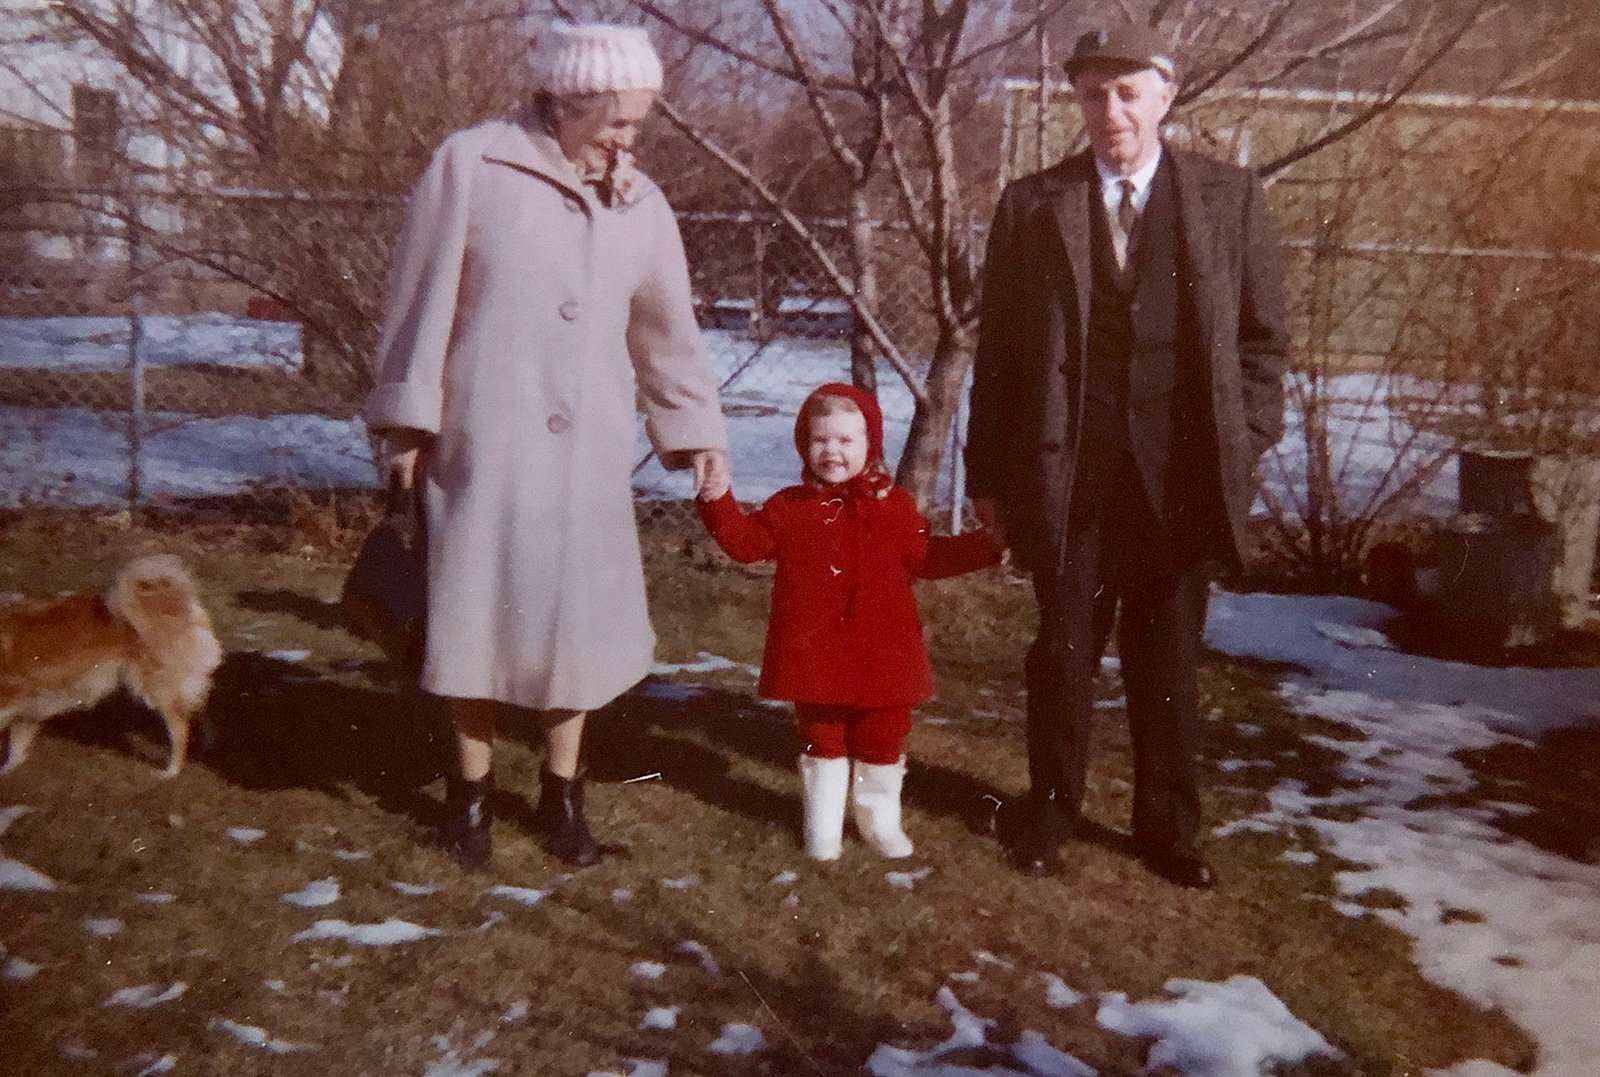 Mary Margaret (Doyle) FitzGerald, with her granddaughter and husband, Sioban Maire FitzGerald and Alphonsus FitzGerald. Levittown, NY. 1964